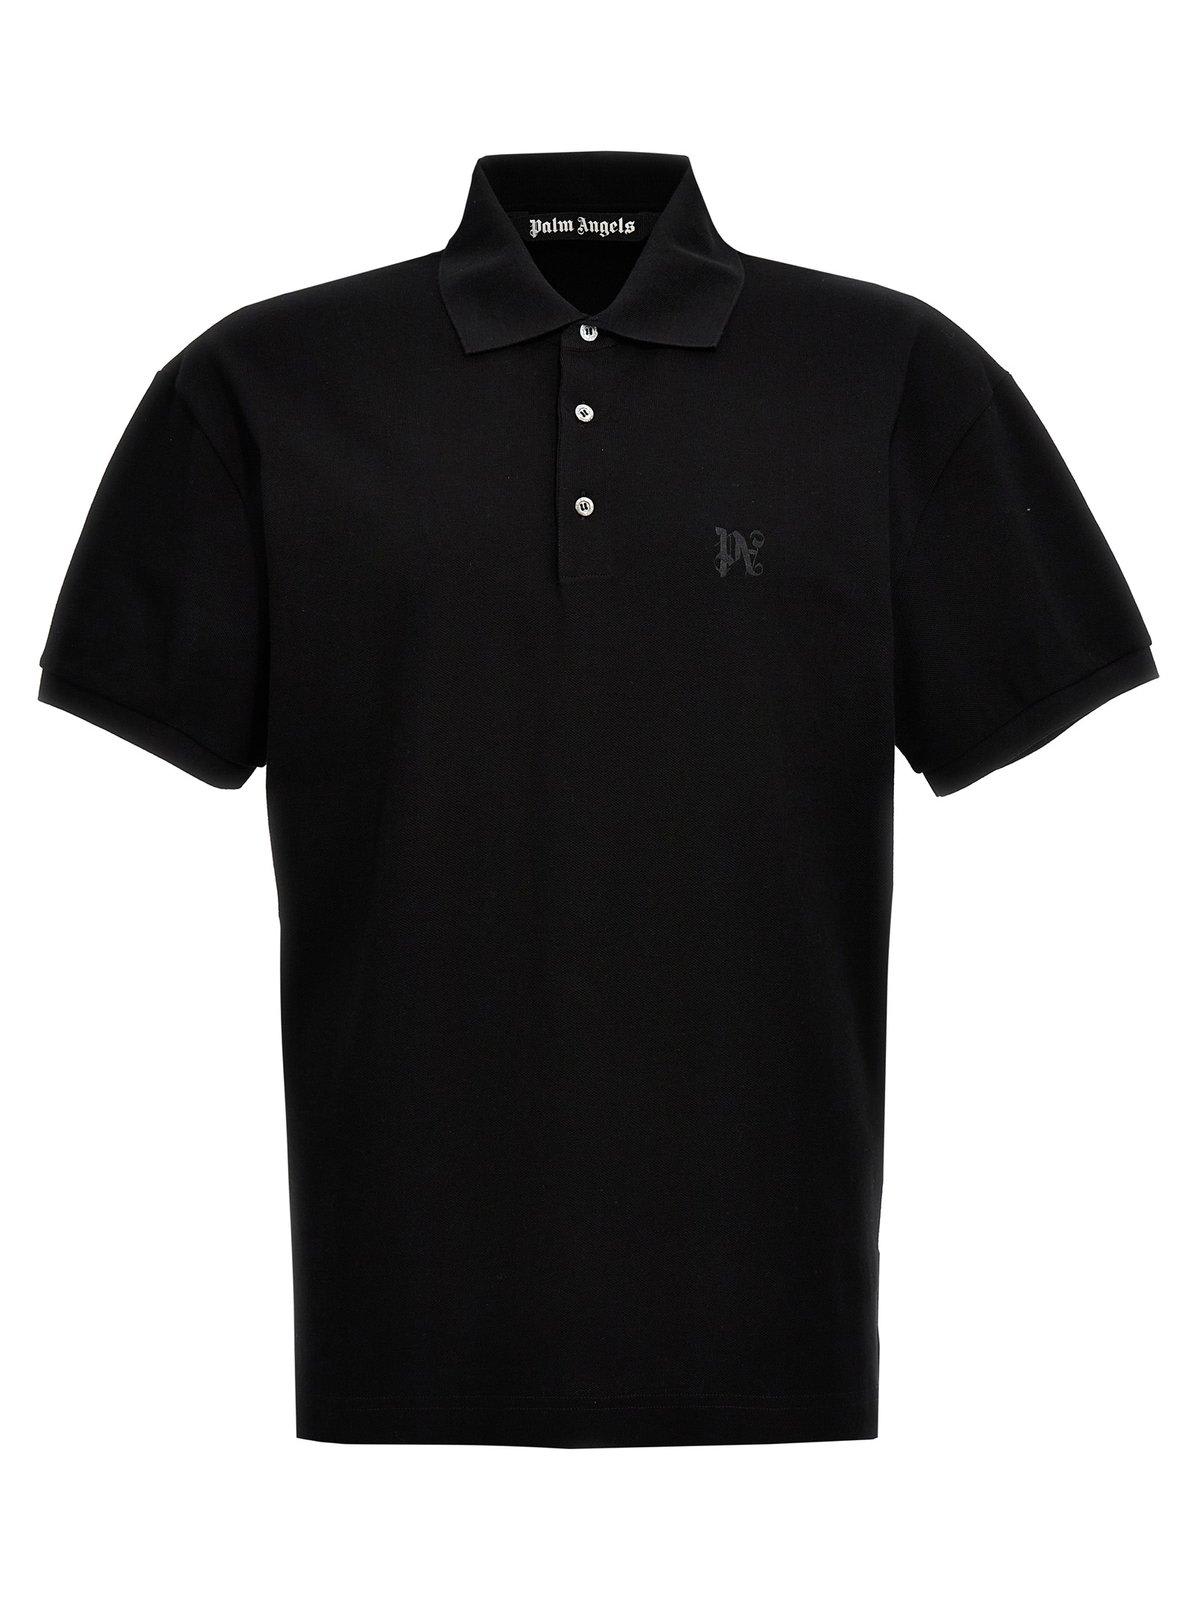 Palm Angels Monogram Embroidered Short-sleeved Polo Shirt In Black